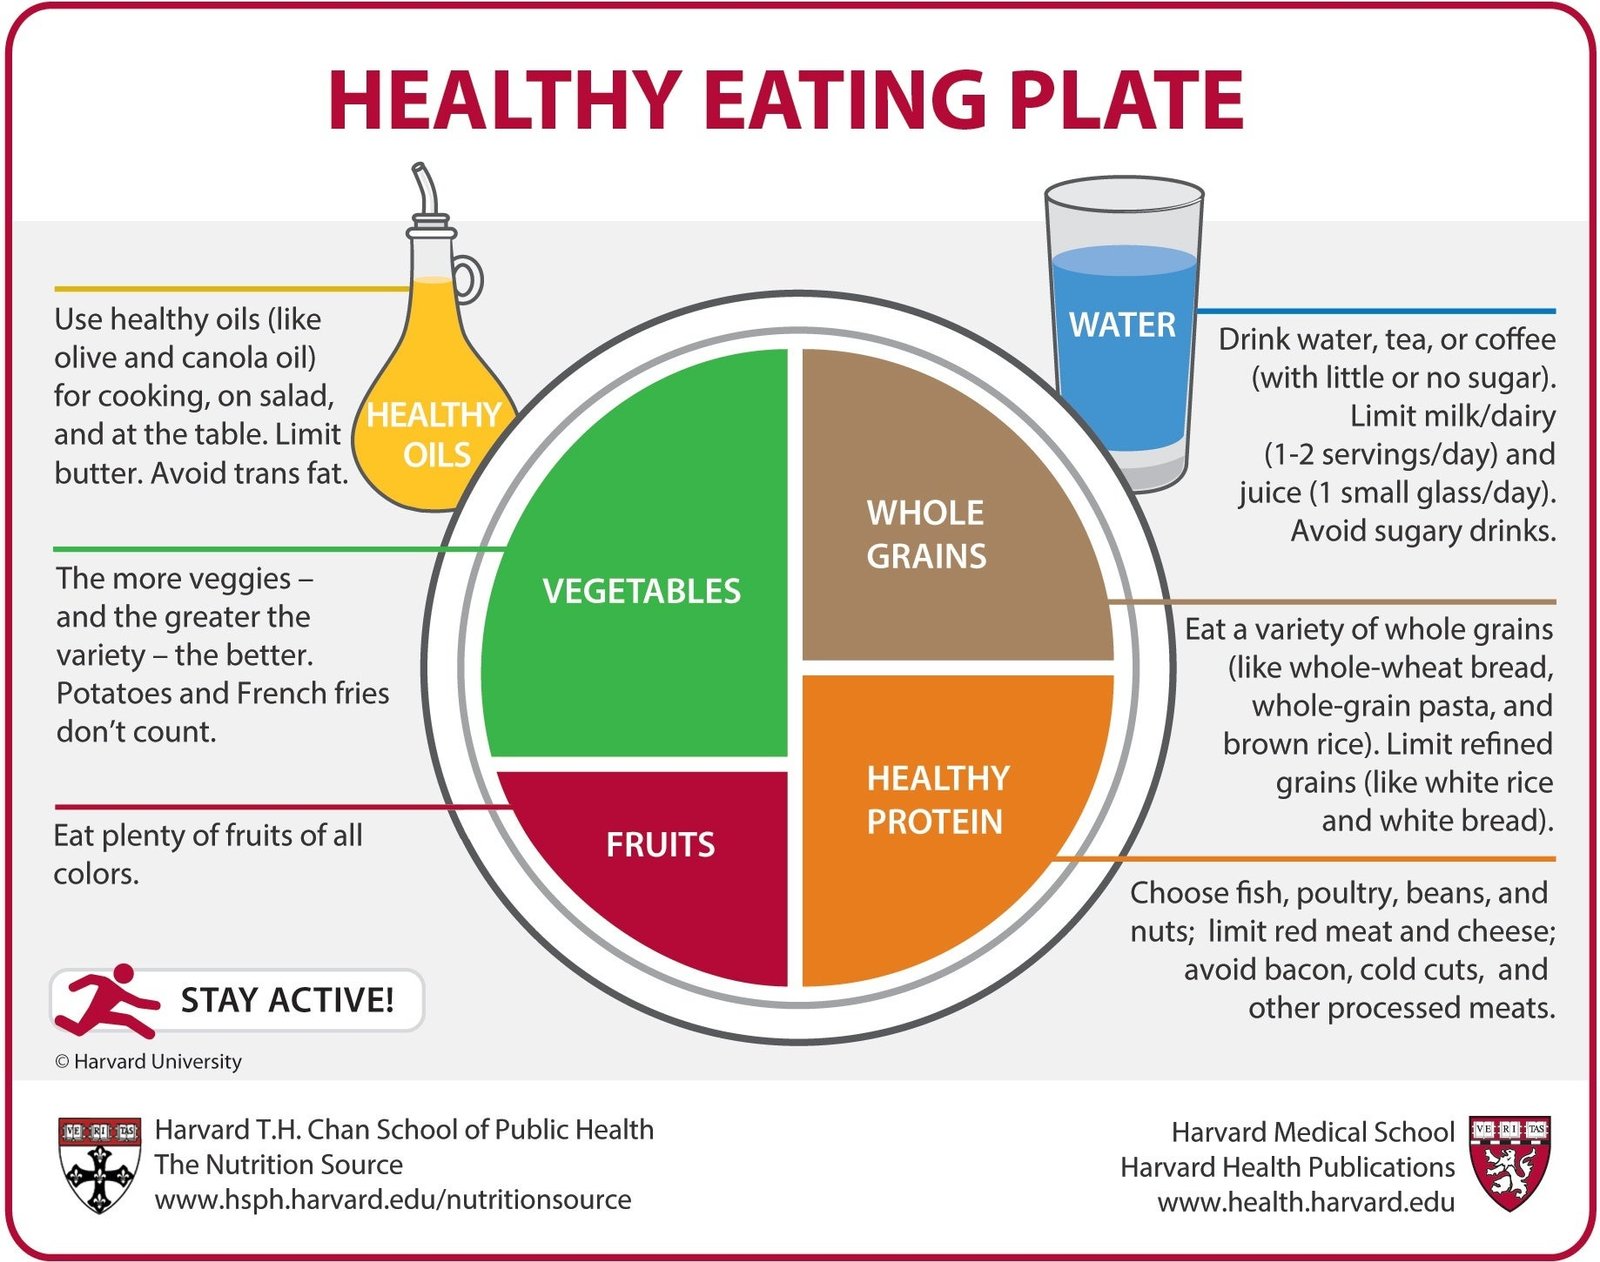 Improving Overall Health with a Balanced Diet